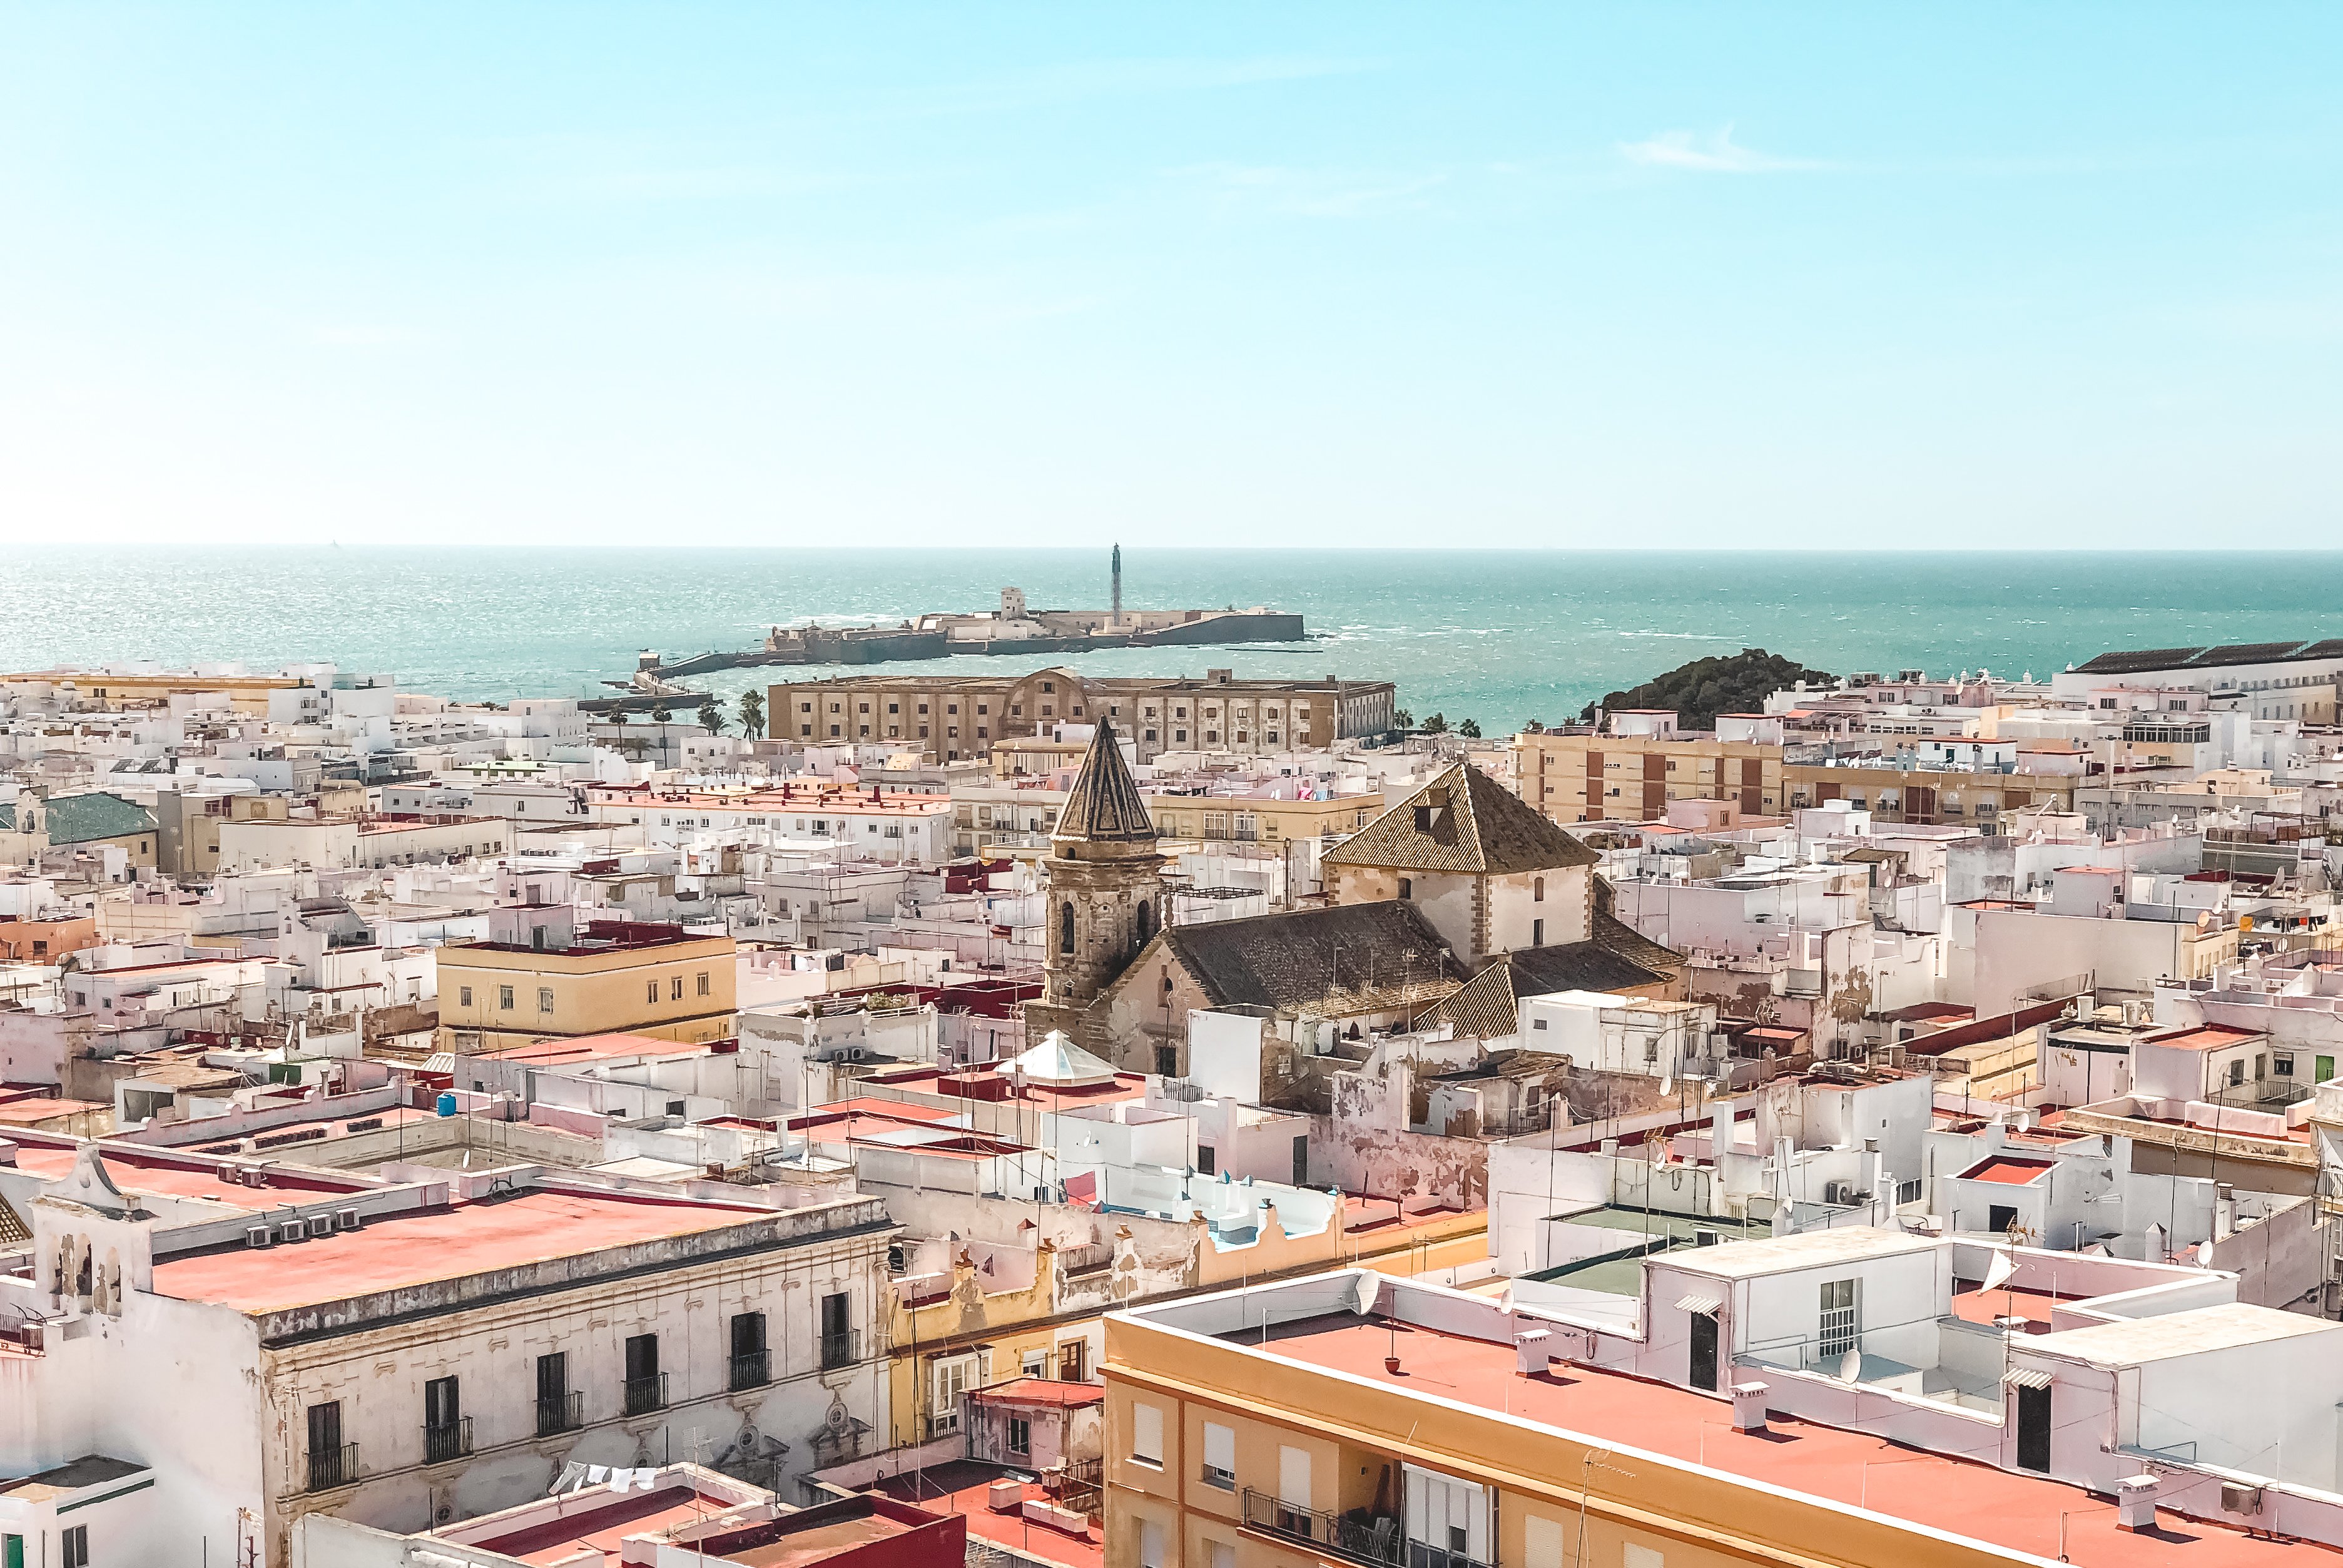 Watchtower in Cadiz surrounded by white buildings with water in the distance